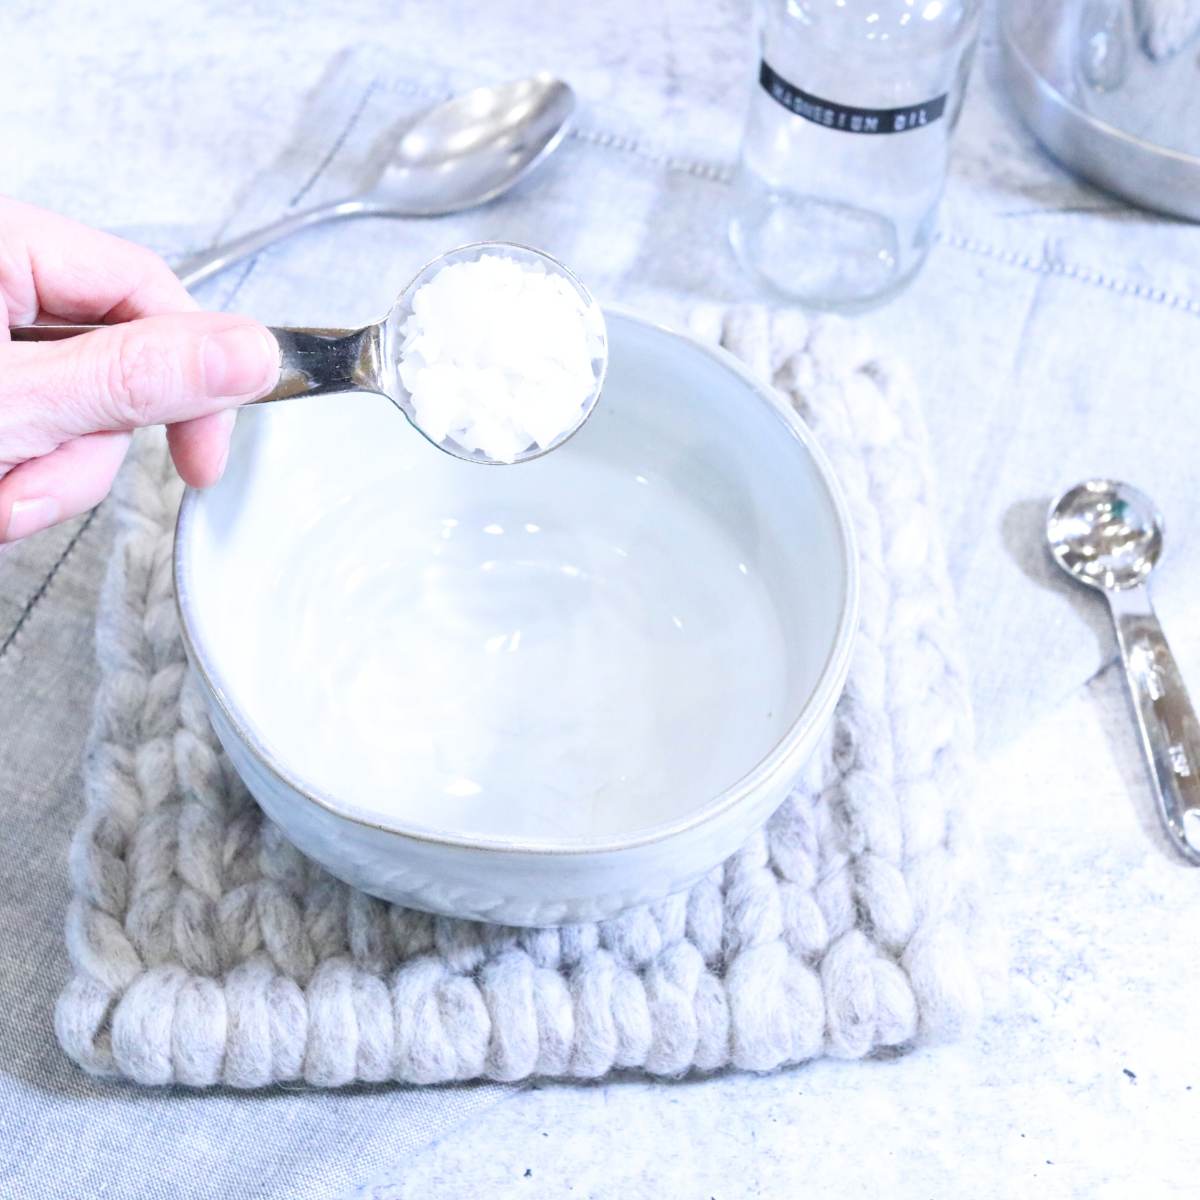 Holding onto a Tablespoon of magnesium flakes, a woman is carefully adding them to a boil of boiling water to make her magnesium oil recipe.